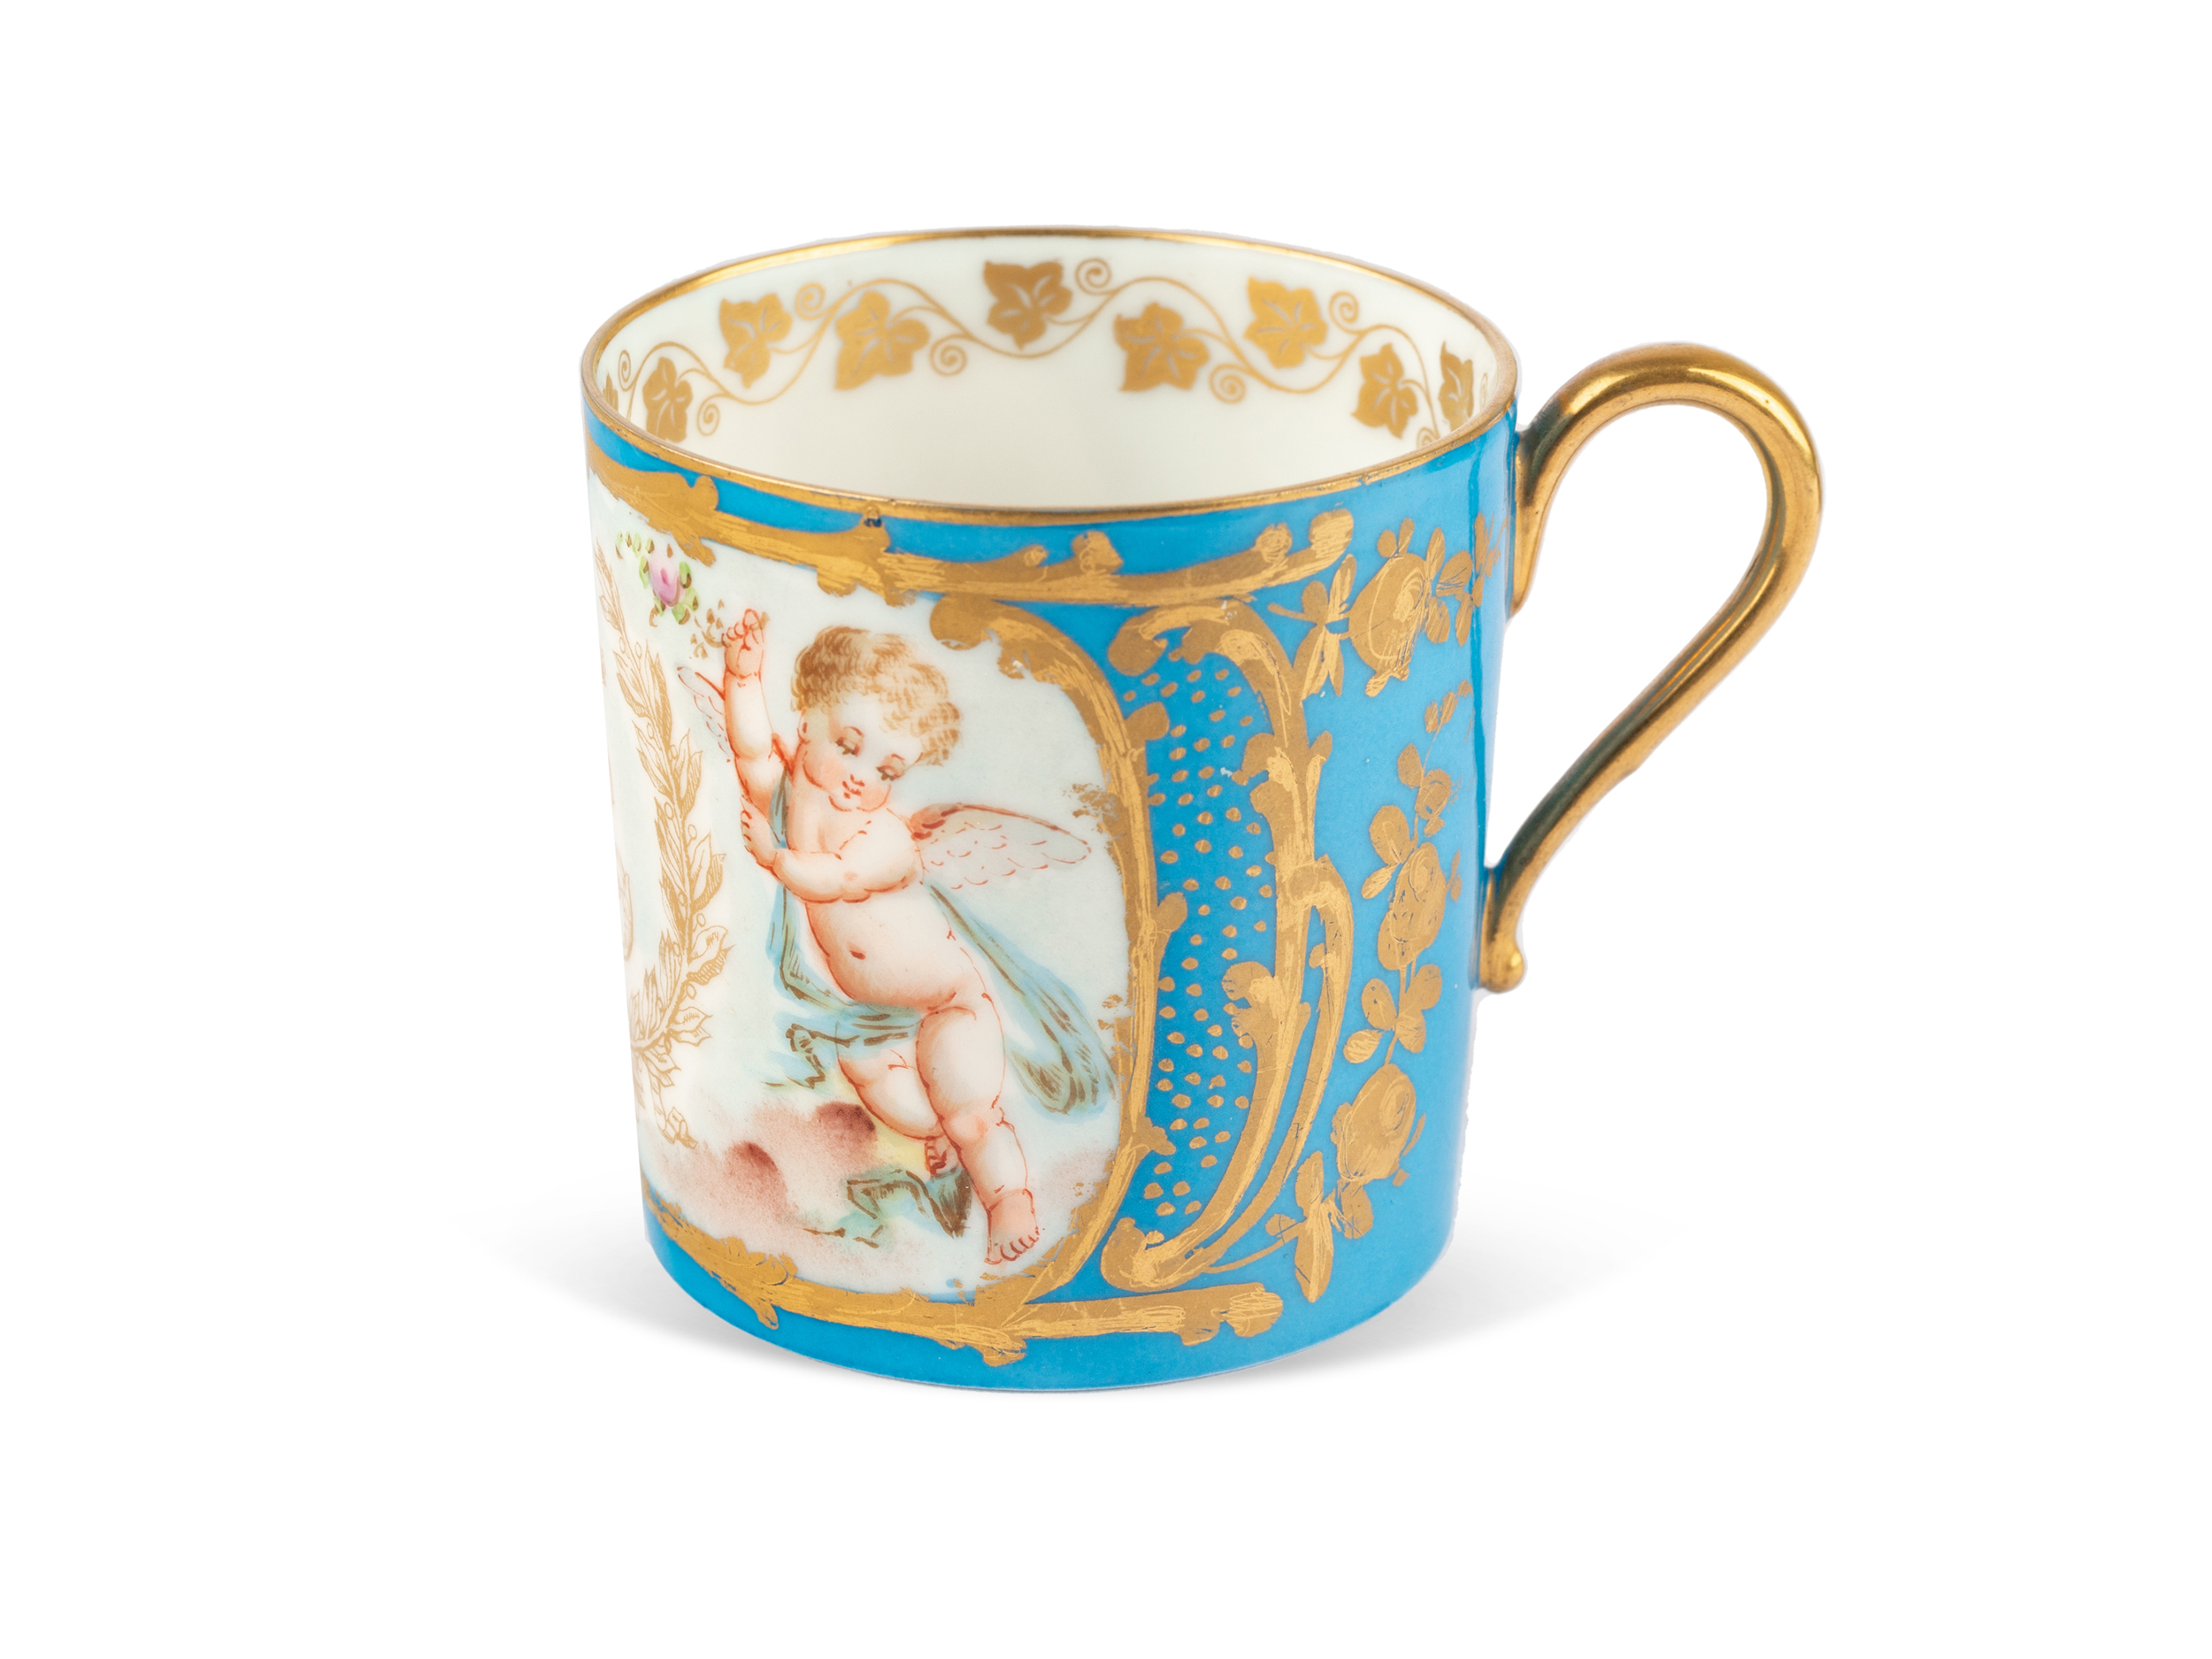 Cup, Sèvres, 1846 - Image 2 of 3